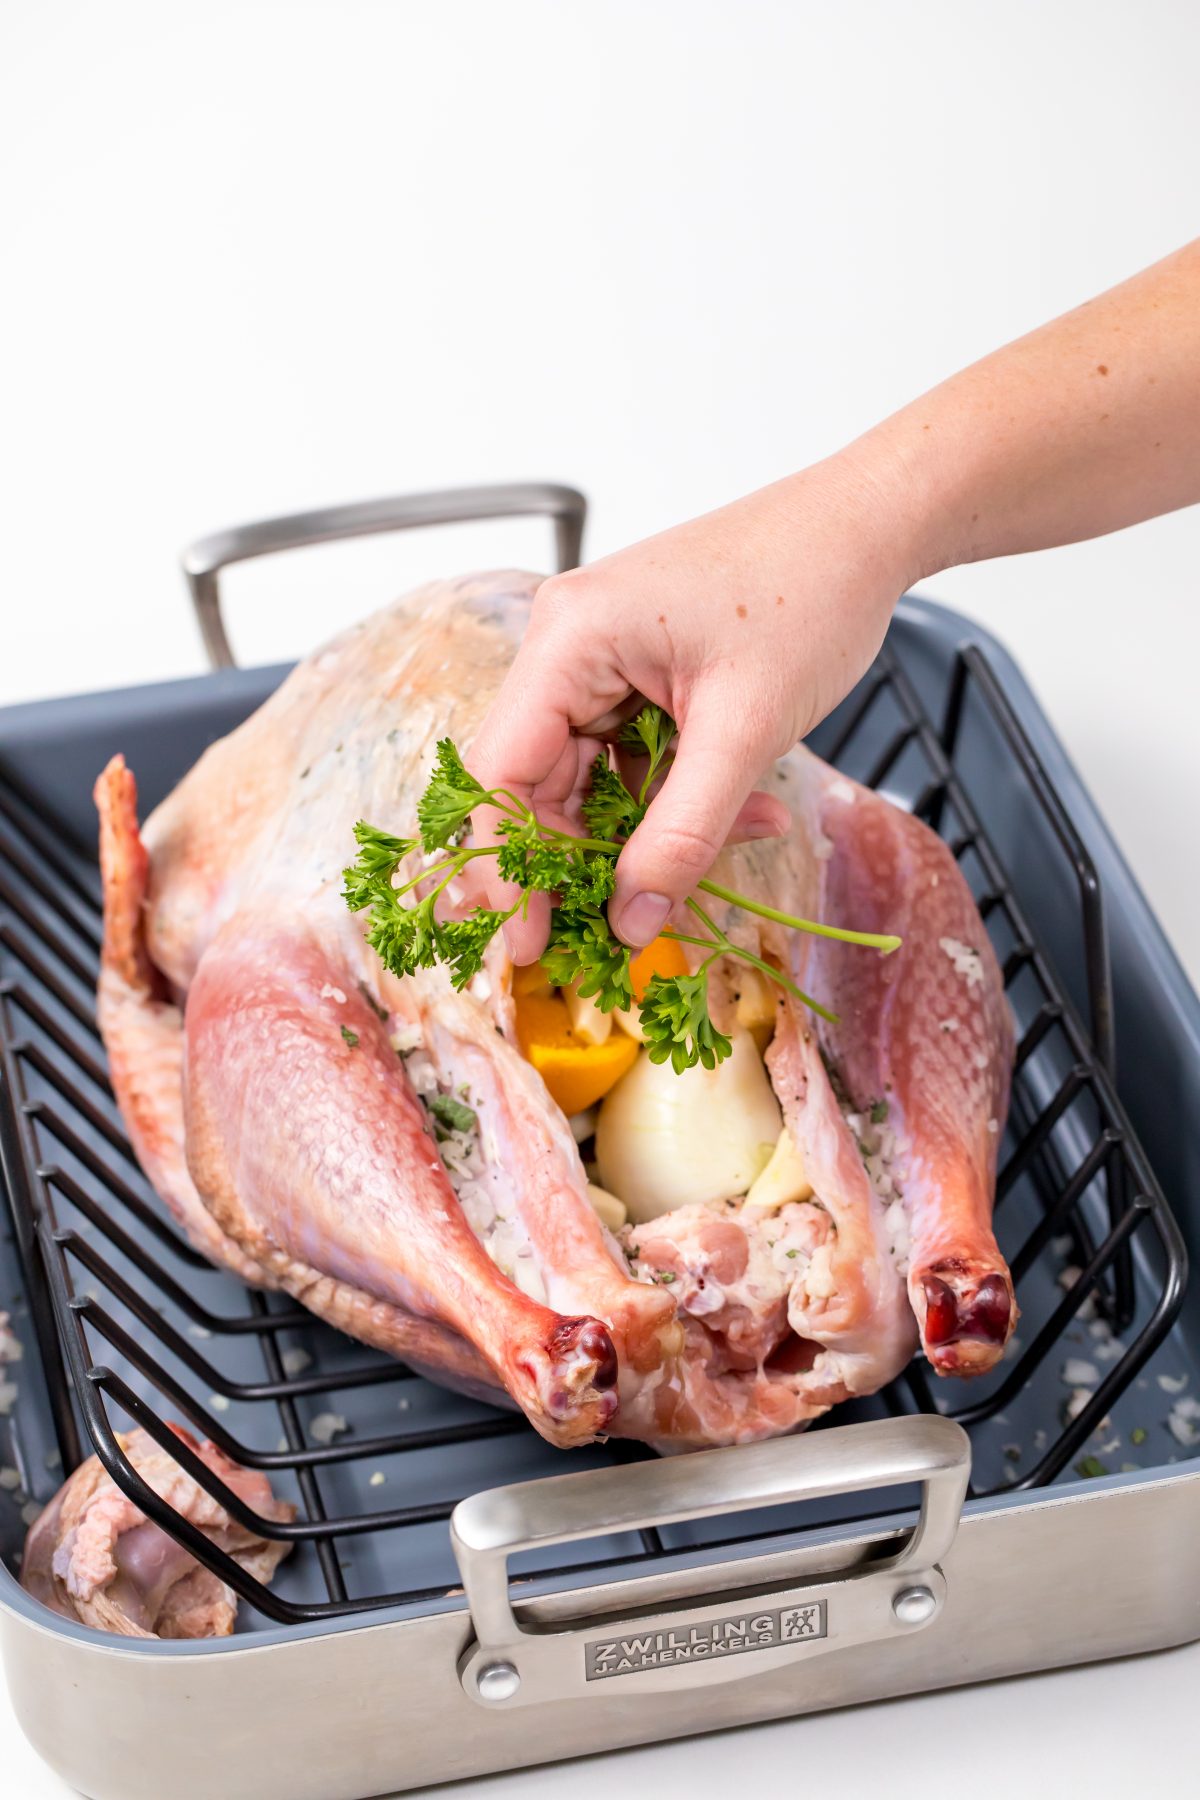 5D4B8979 - Bacon Wrapped Turkey - adding parsley into the inside cavity of the turkey